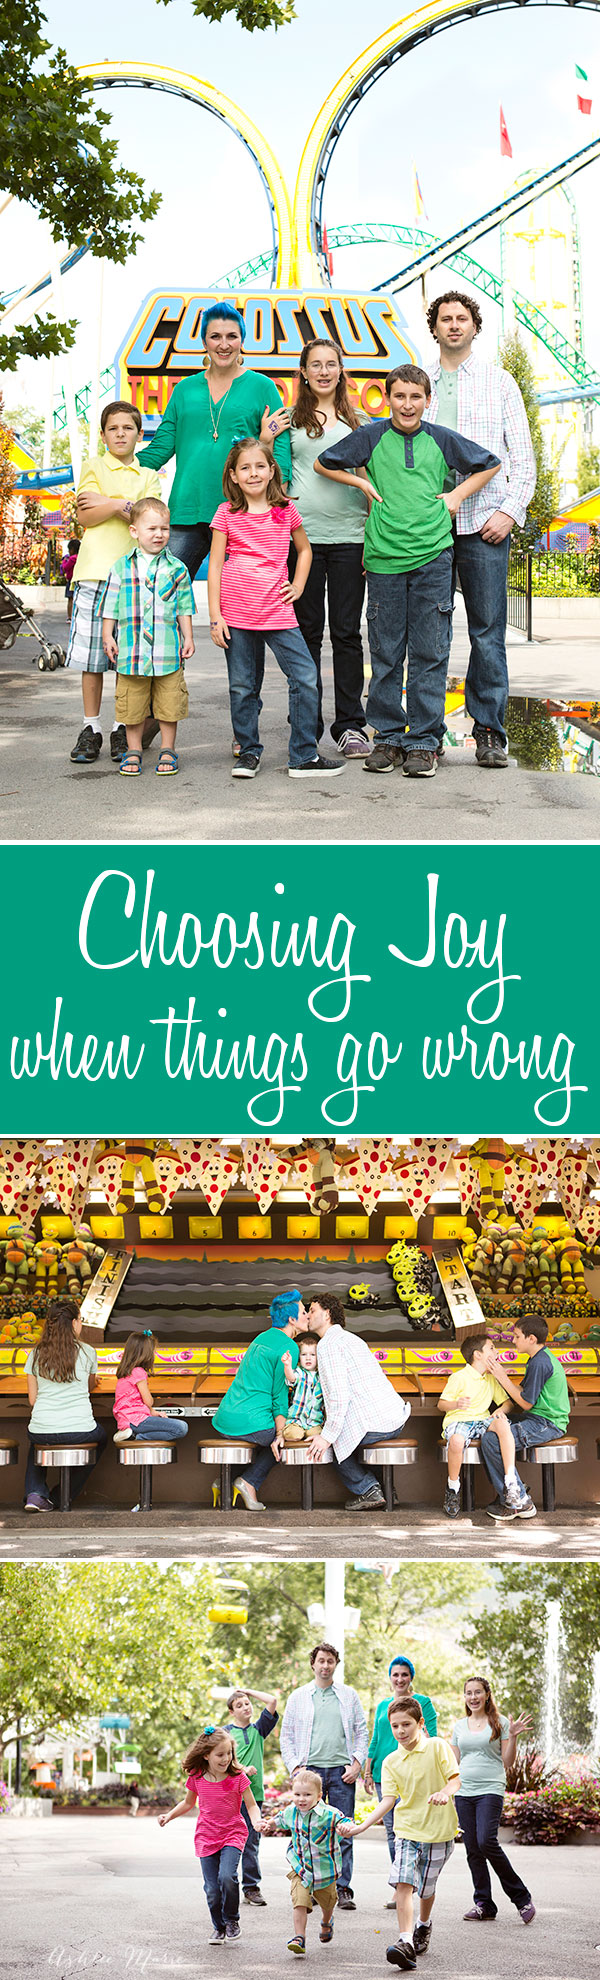 life doesnt always go the way you expect, but the one thing you can control is how you react - choosing joy will help you have a happy life no matter what happens